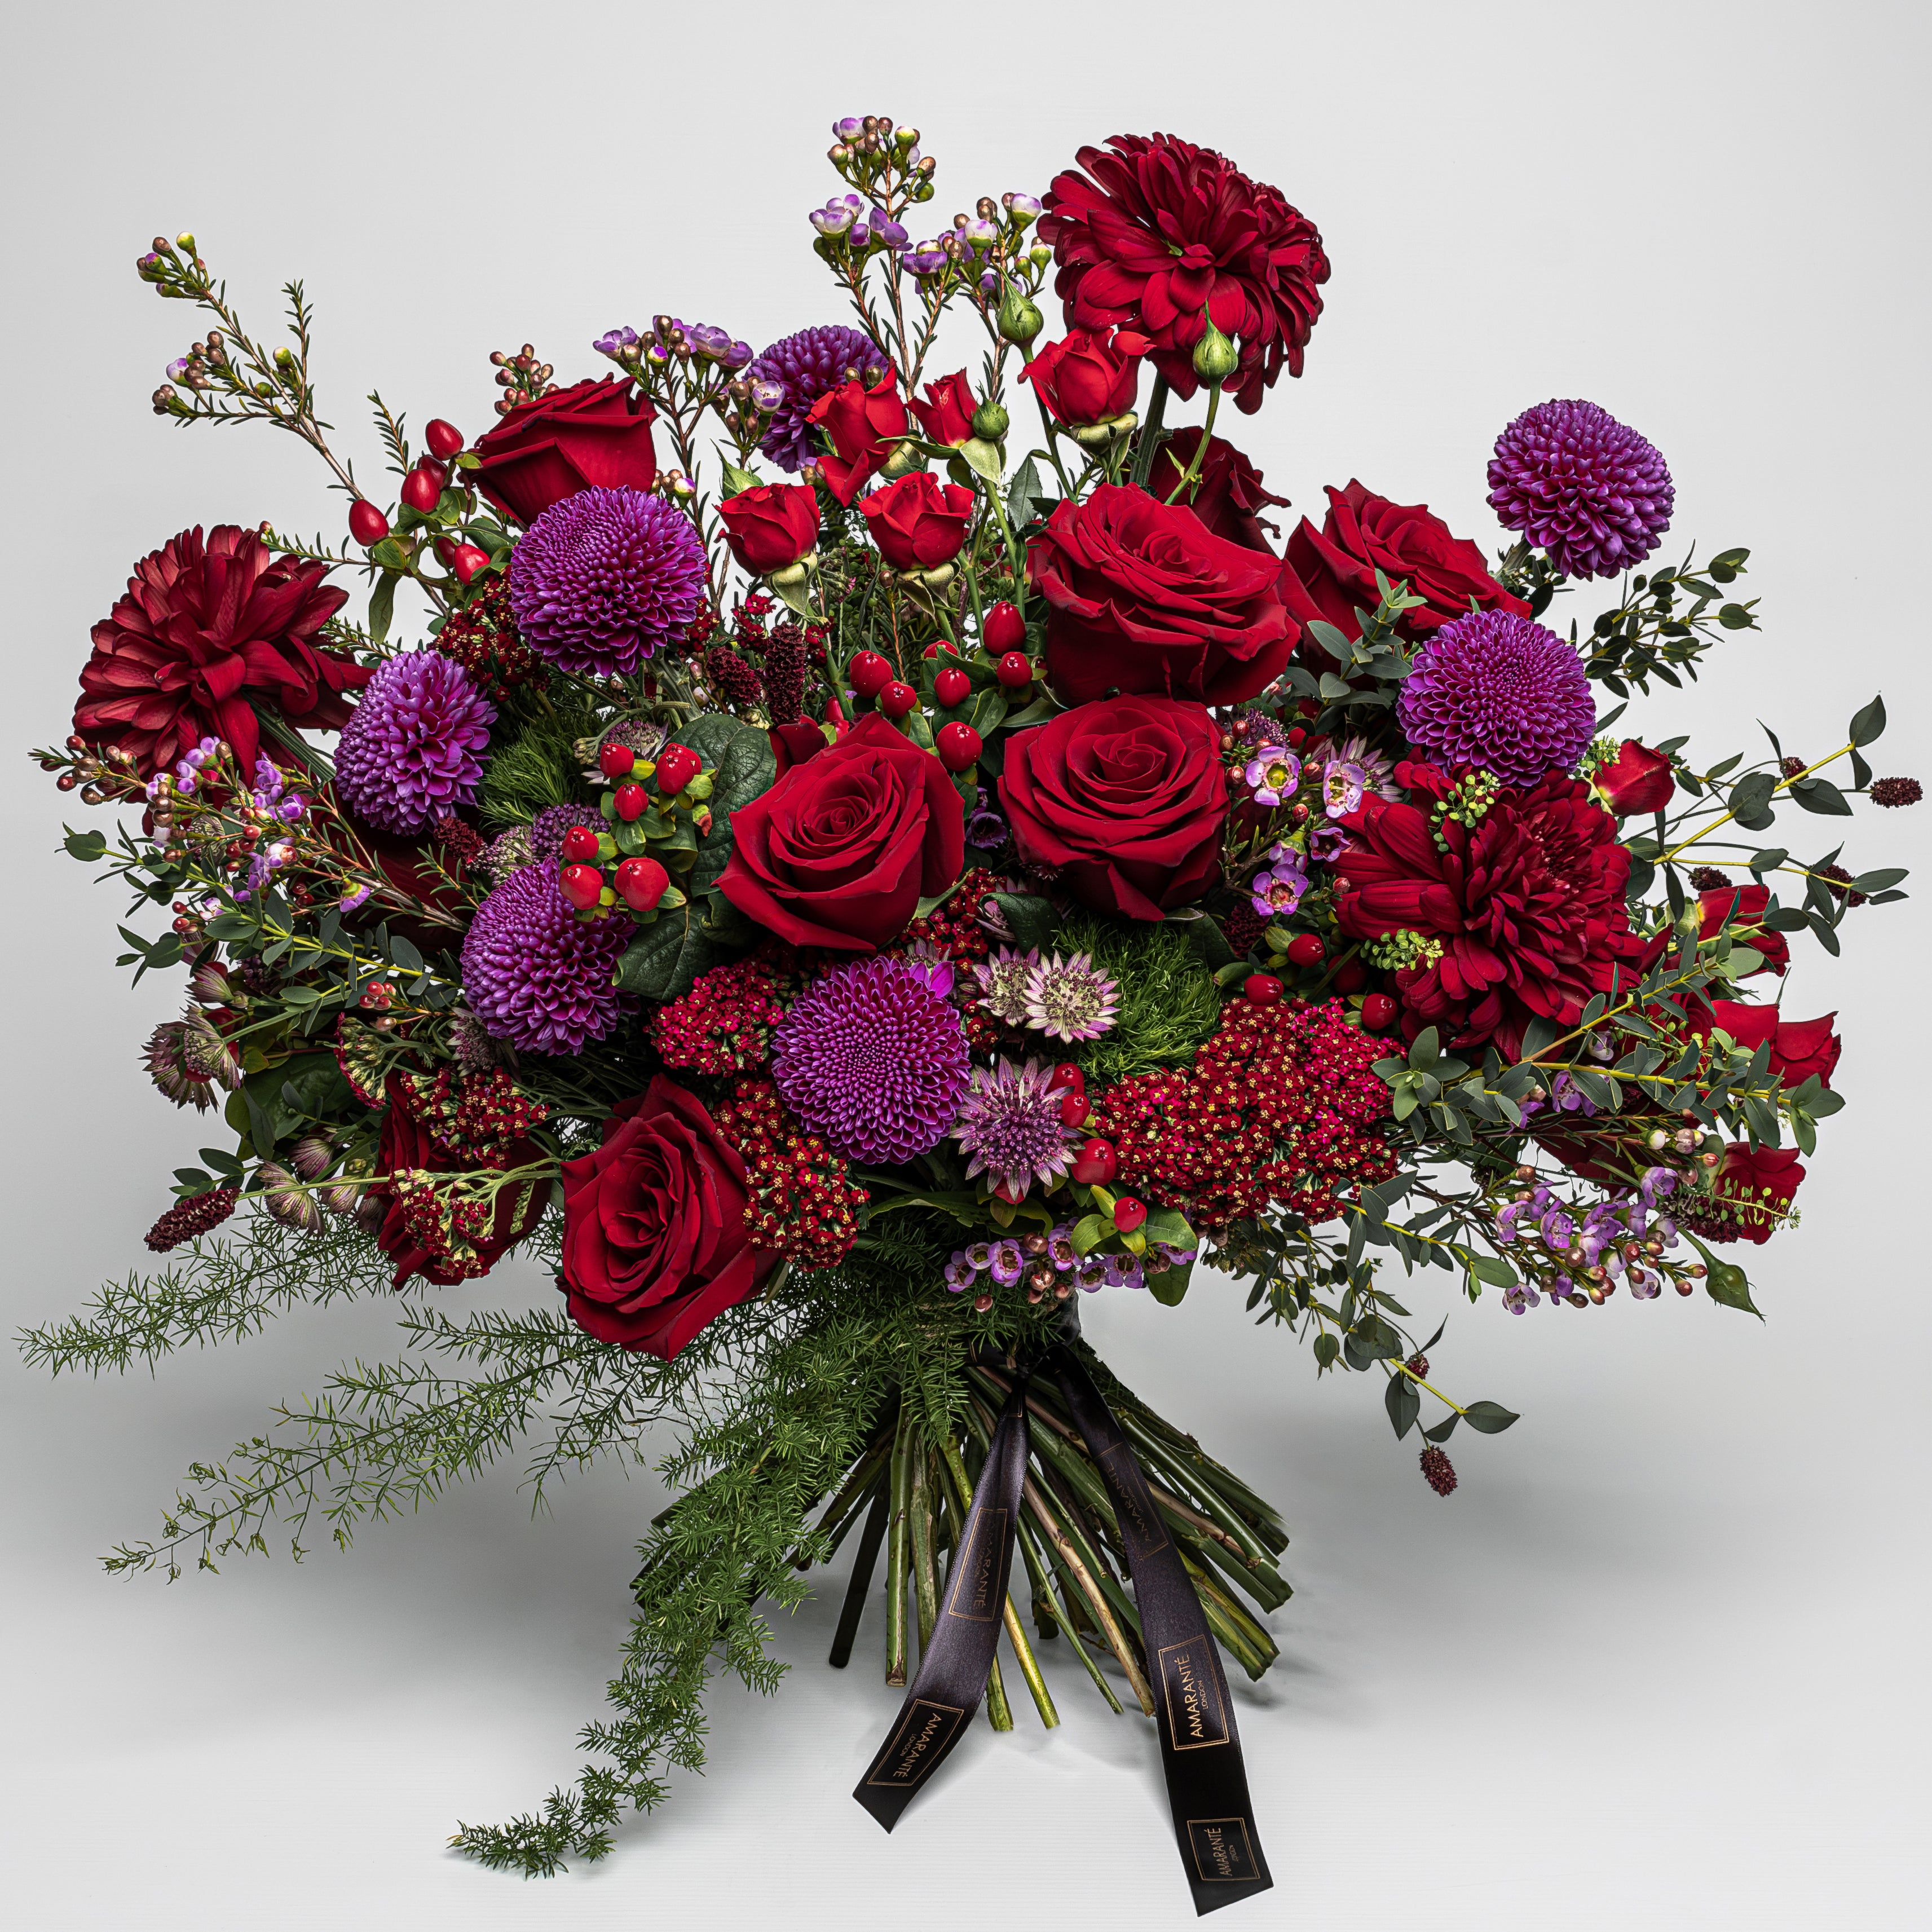 Crimson Lust Fresh Flower Bouquet features deep reds and rich purples, each flower meticulously selected to create a luxurious tapestry ideal for International Women's Day and Mother's Day, Valentine's Day and other important moments. This luxury floral arrangement is dominated by the romantic allure of velvety red roses, their full blooms symbolising love and respect. Dark red dahlias add a lush, textural contrast with their intricate petals.